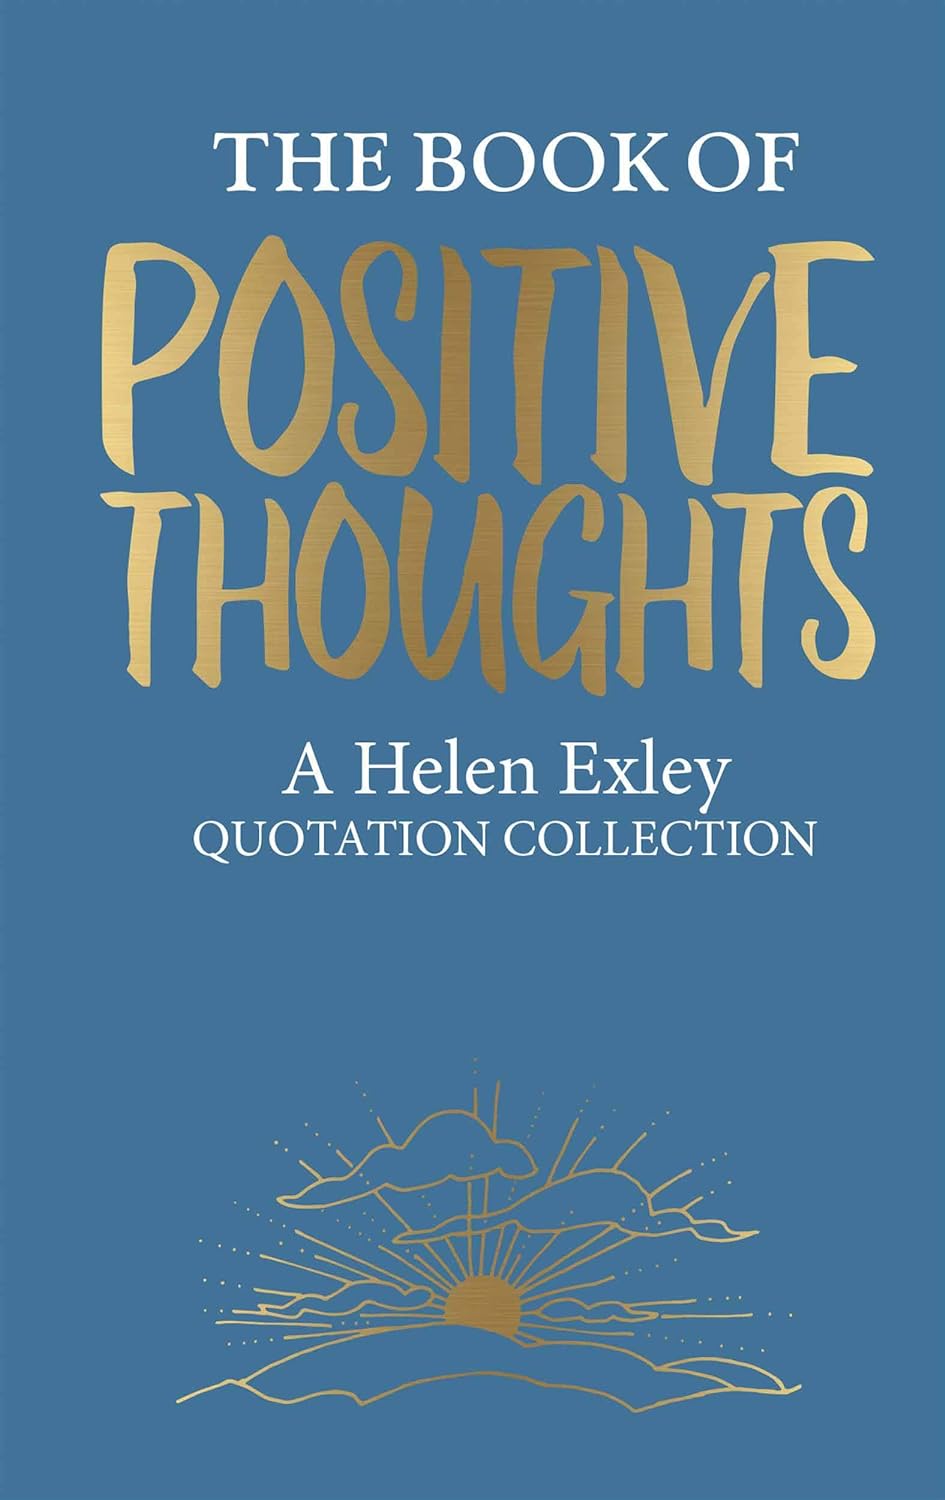 Book of Positive Thoughts Quotations